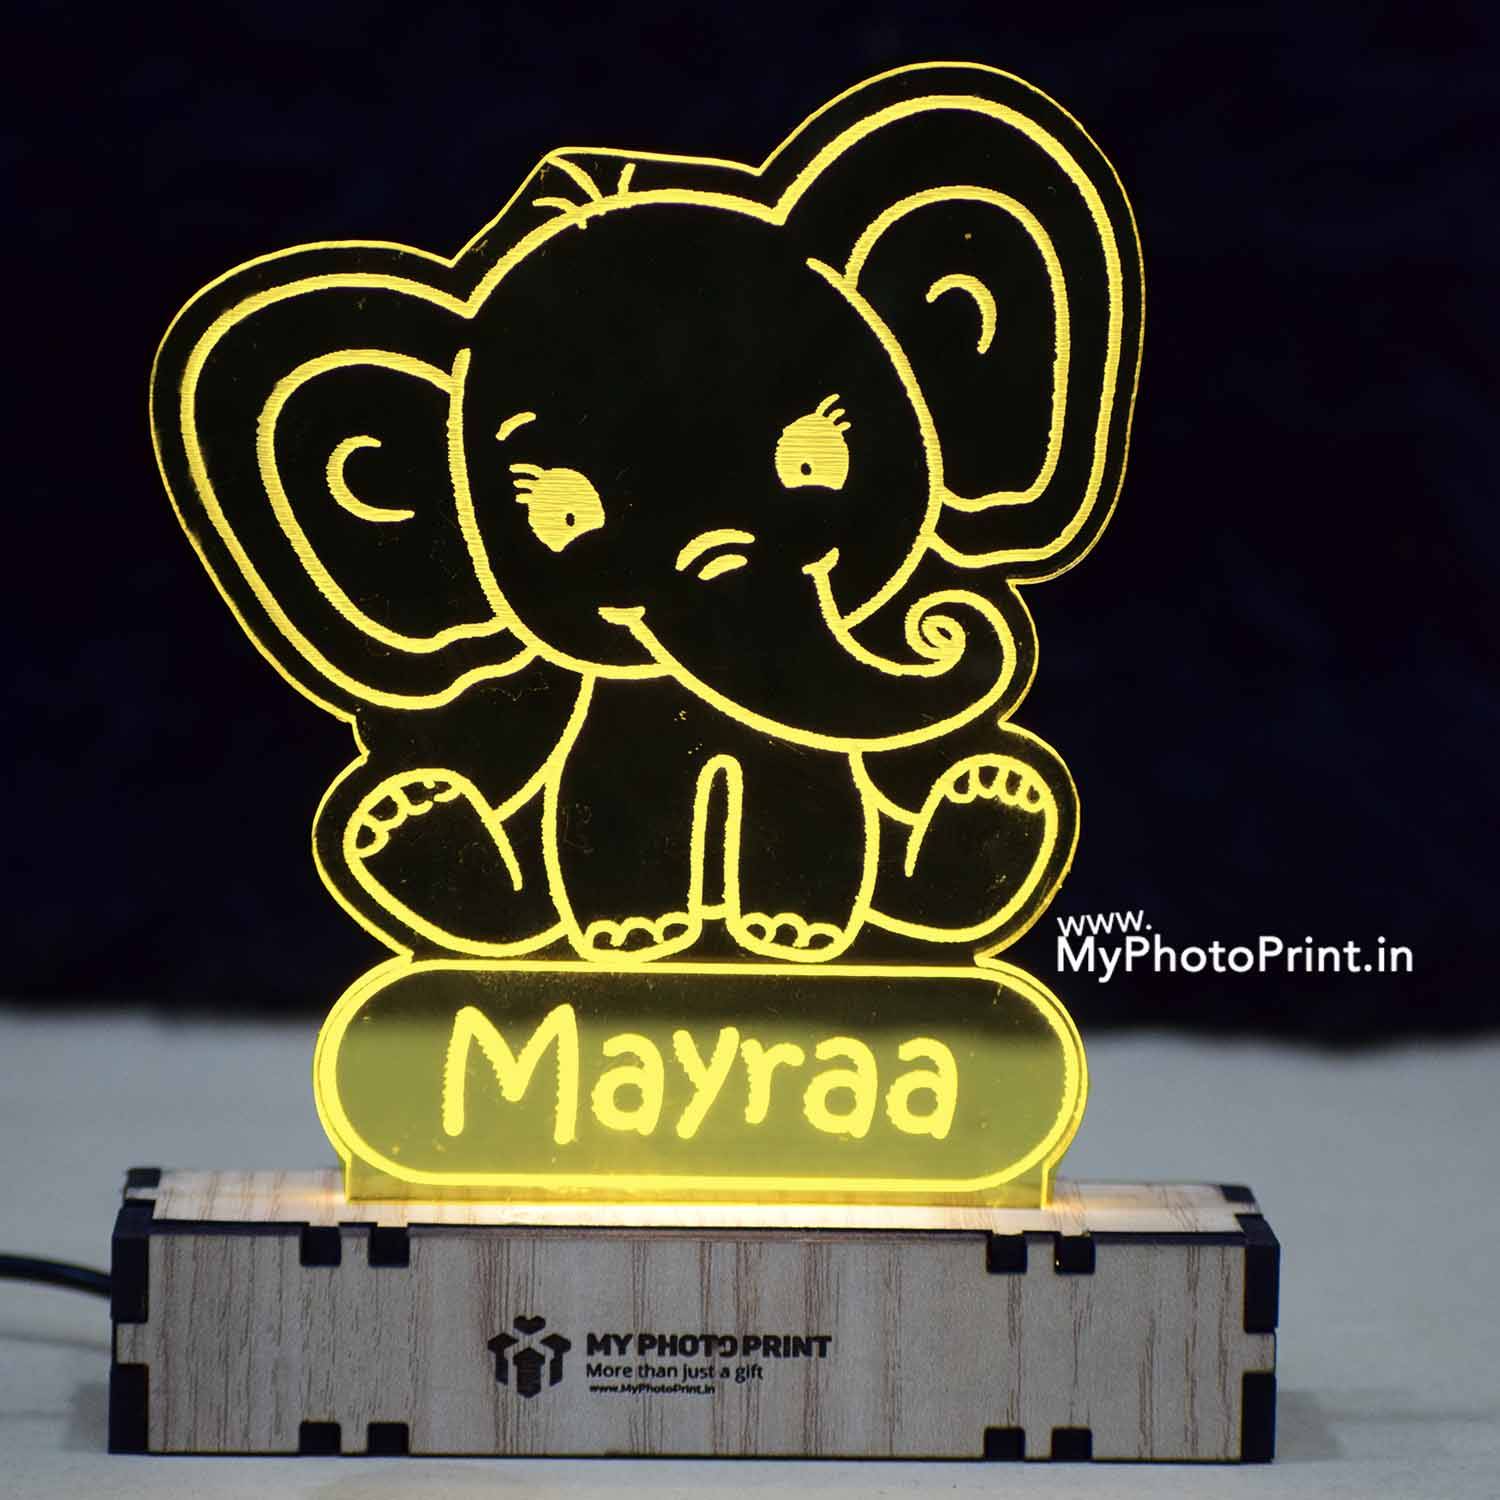 Customized Baby Elephant Acrylic 3d Illusion Led Lamp With Color Changing Led And Remote#2129